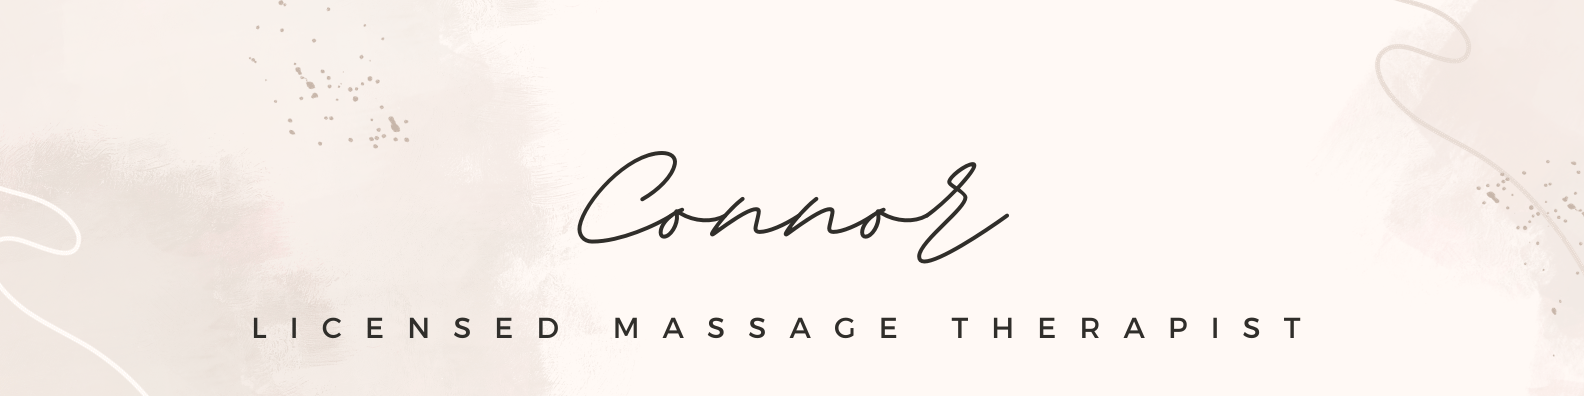 This image shows the name of our amazing massage therapist Connor.